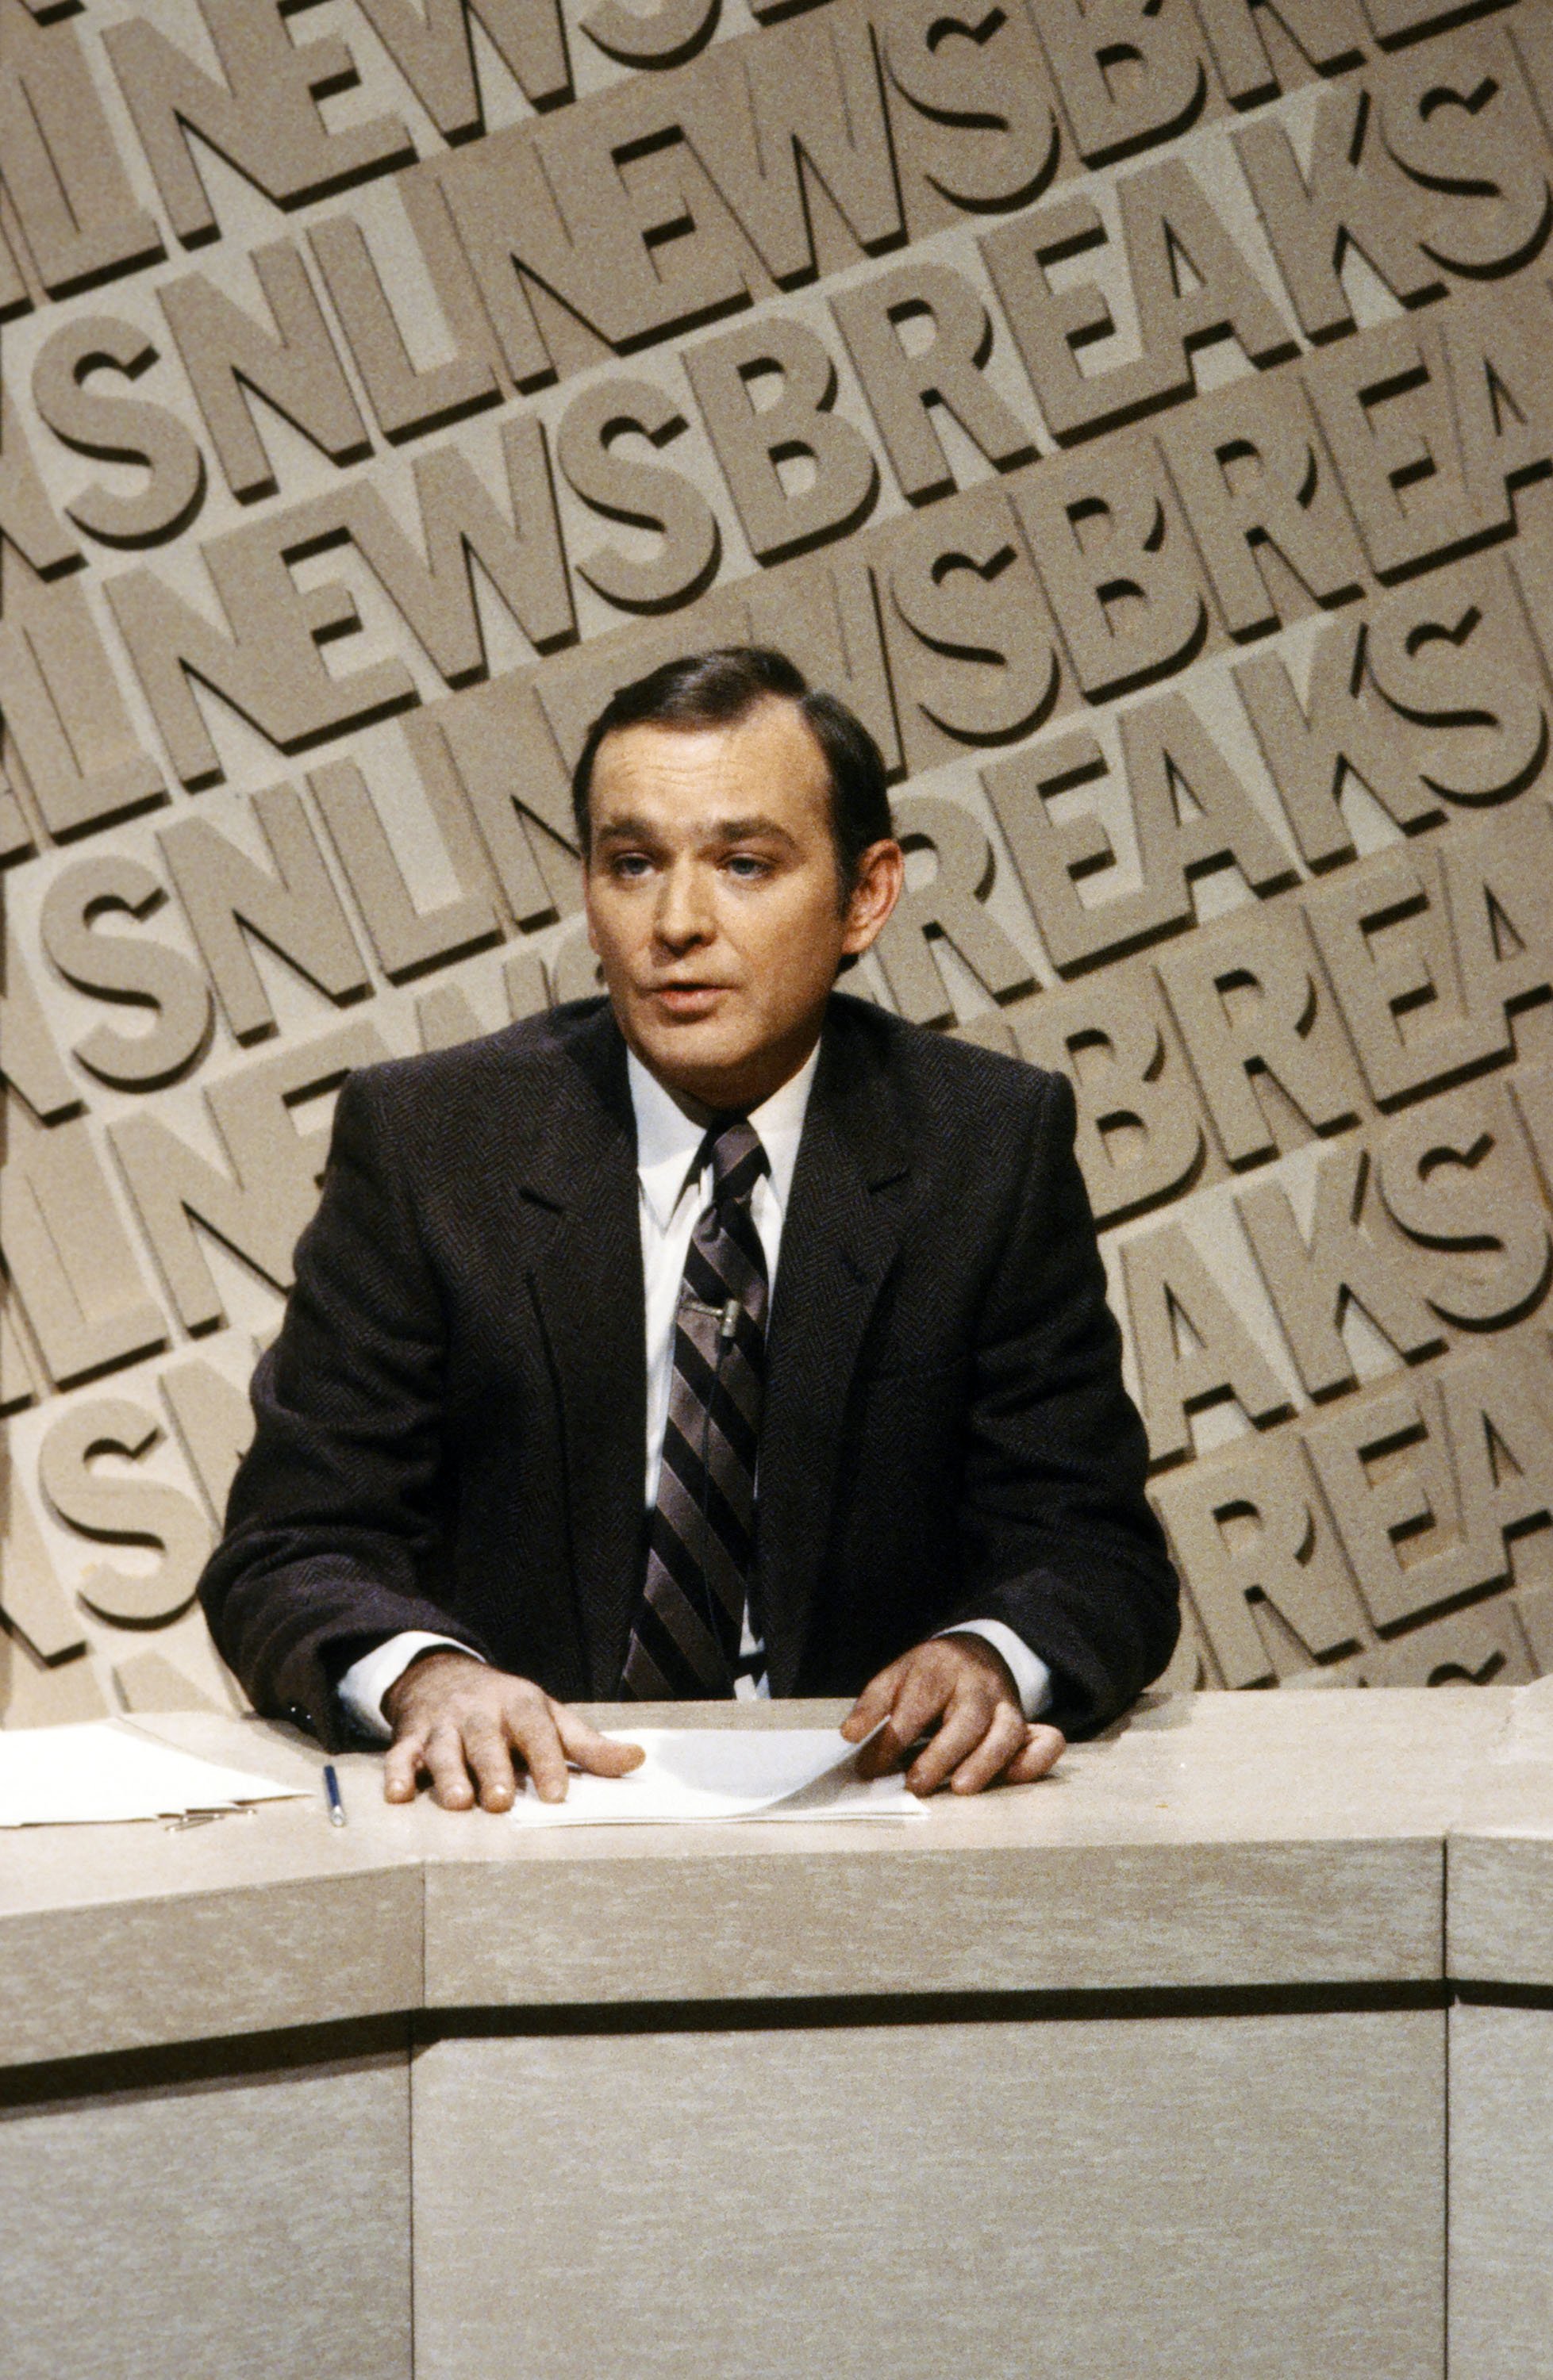 Brian Doyle-Murray during the 'SNL Newsbreak' skit on October 17, 1981. | Source: Getty Images